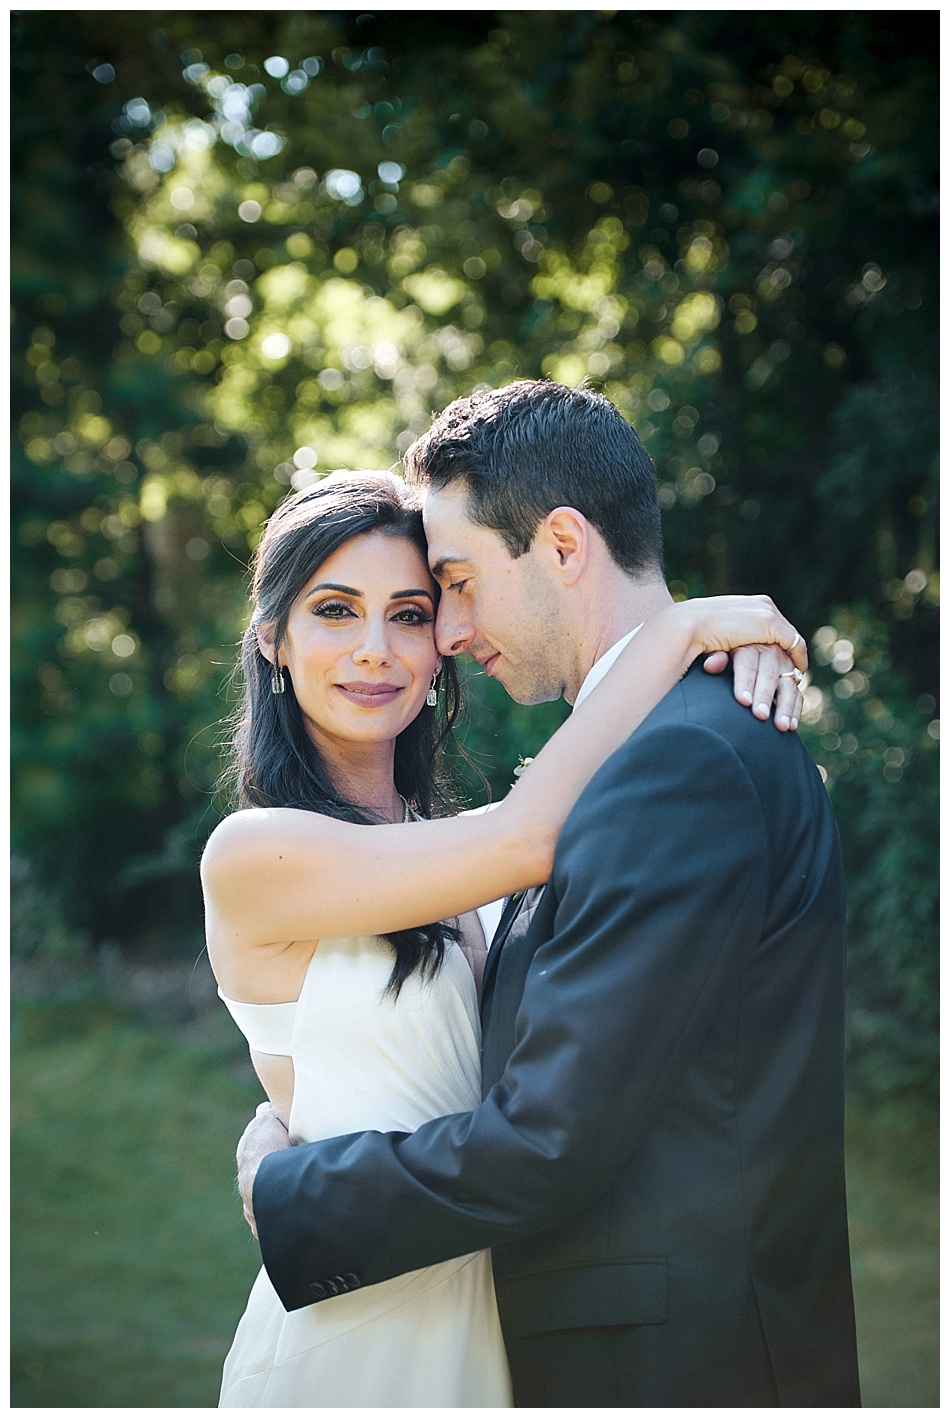 Bride in Jenny Packham dress, with her groom in a black tux, before their wedding ceremony at a private residence, in Atlanta Georgia.